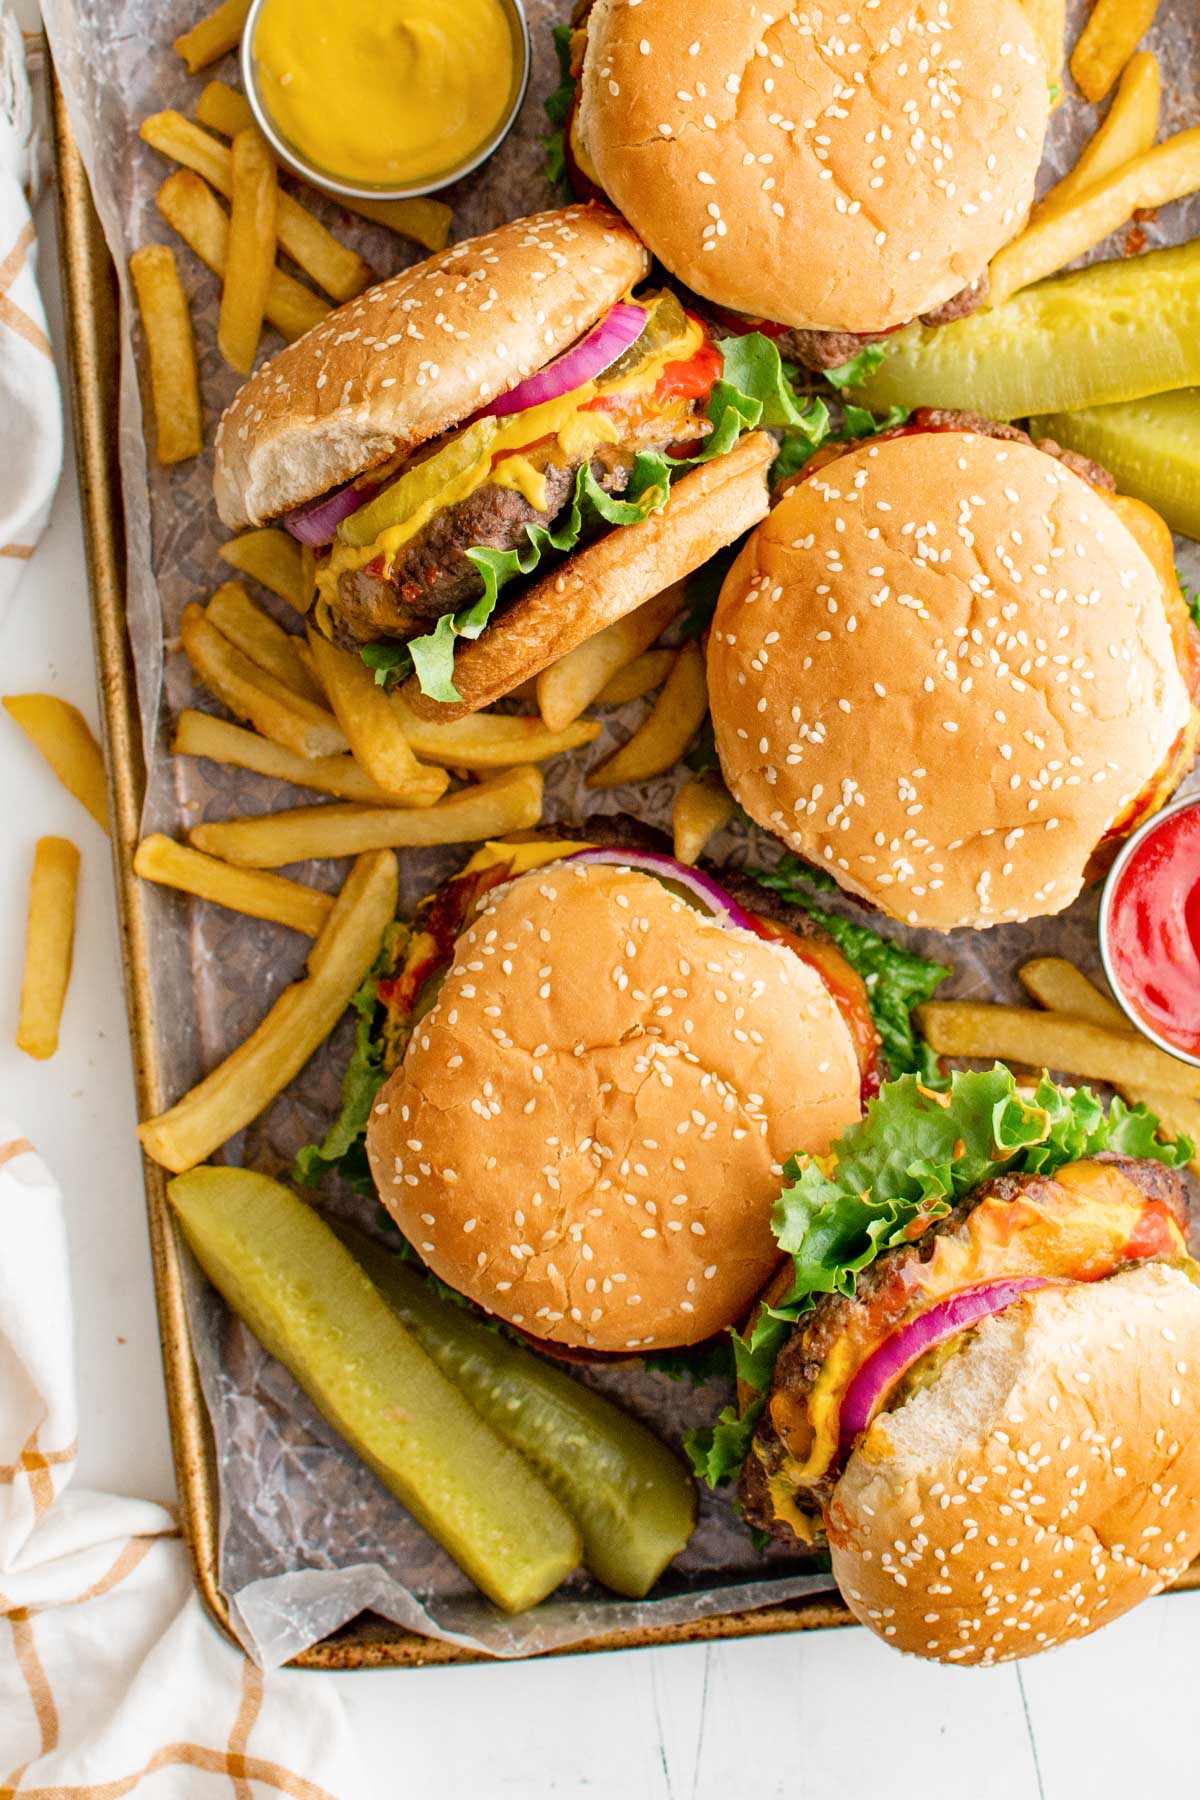 Metal baking sheet with cheeseburgers, fries and pickles.